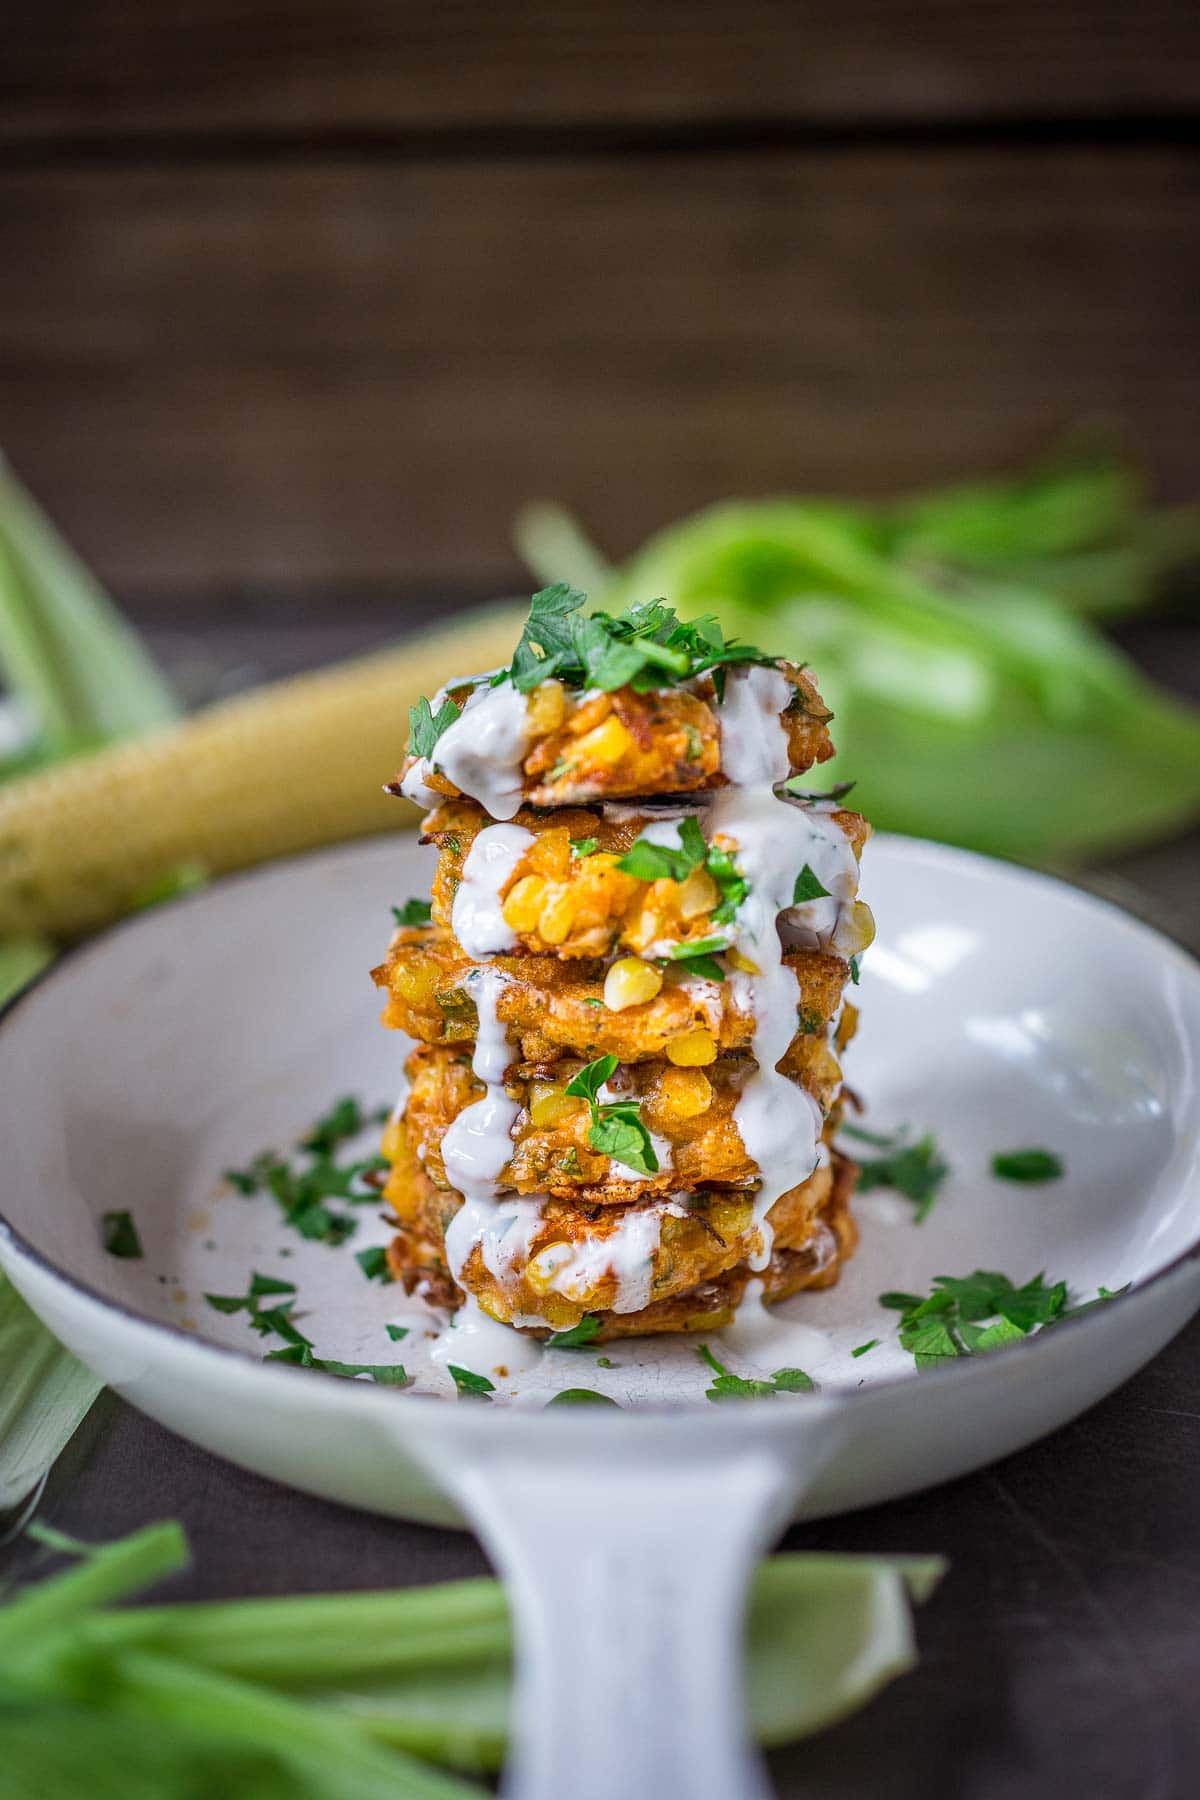 Corn fritters with jalapeno and cheddar.